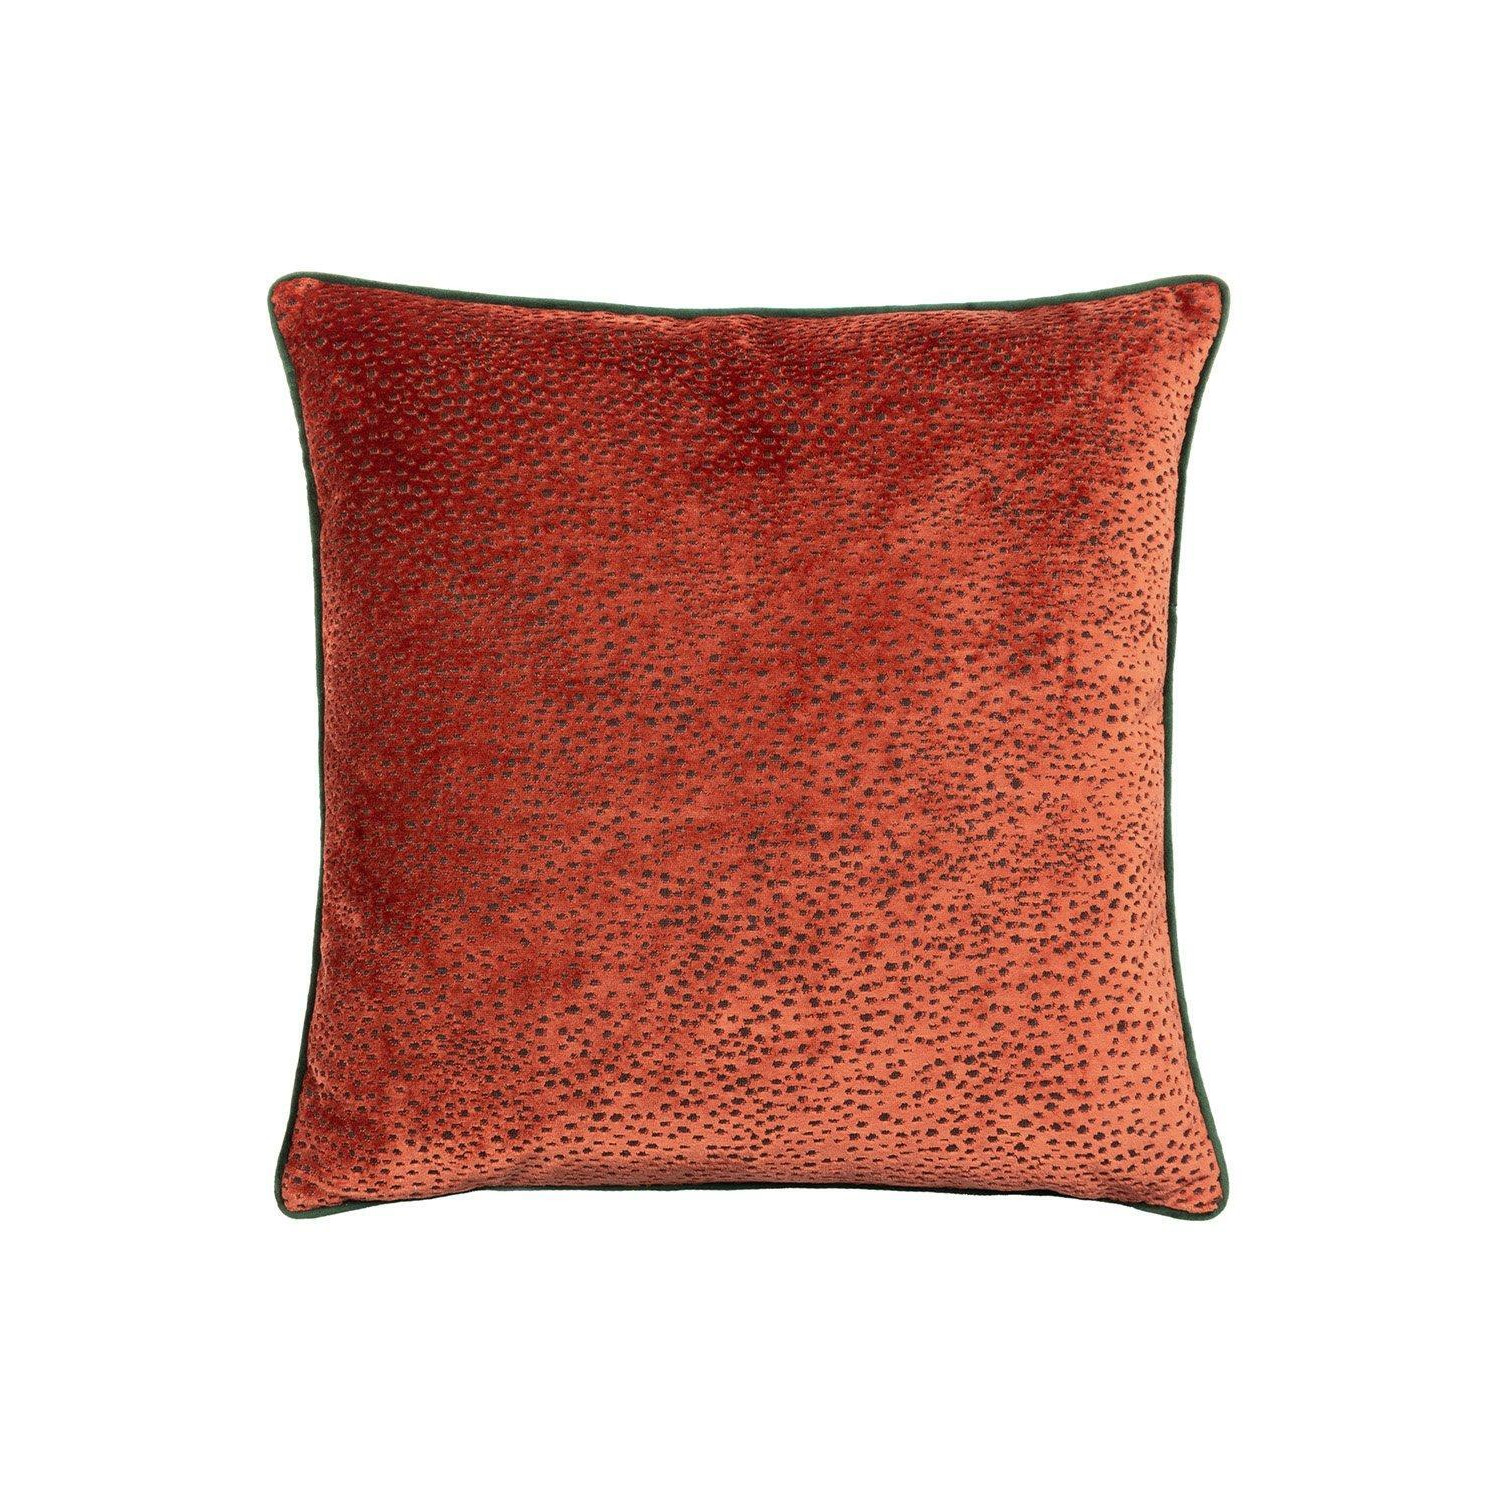 Estelle Spotted Piped Cut Velvet Cushion - image 1